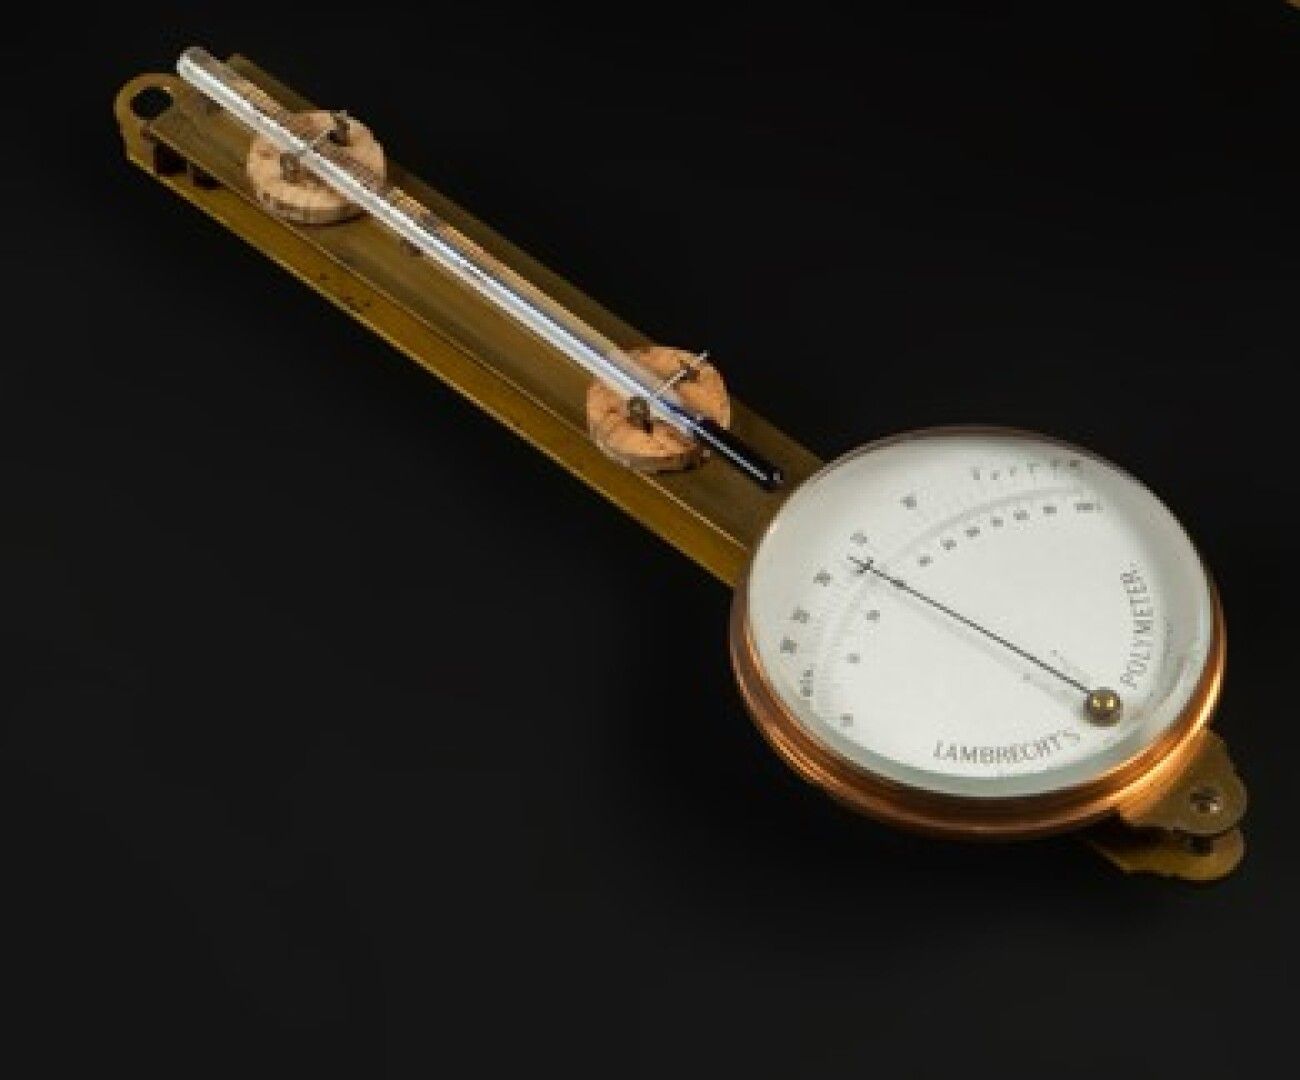 Null Lambrecht polymer with its alcohol thermometer. Brass frame